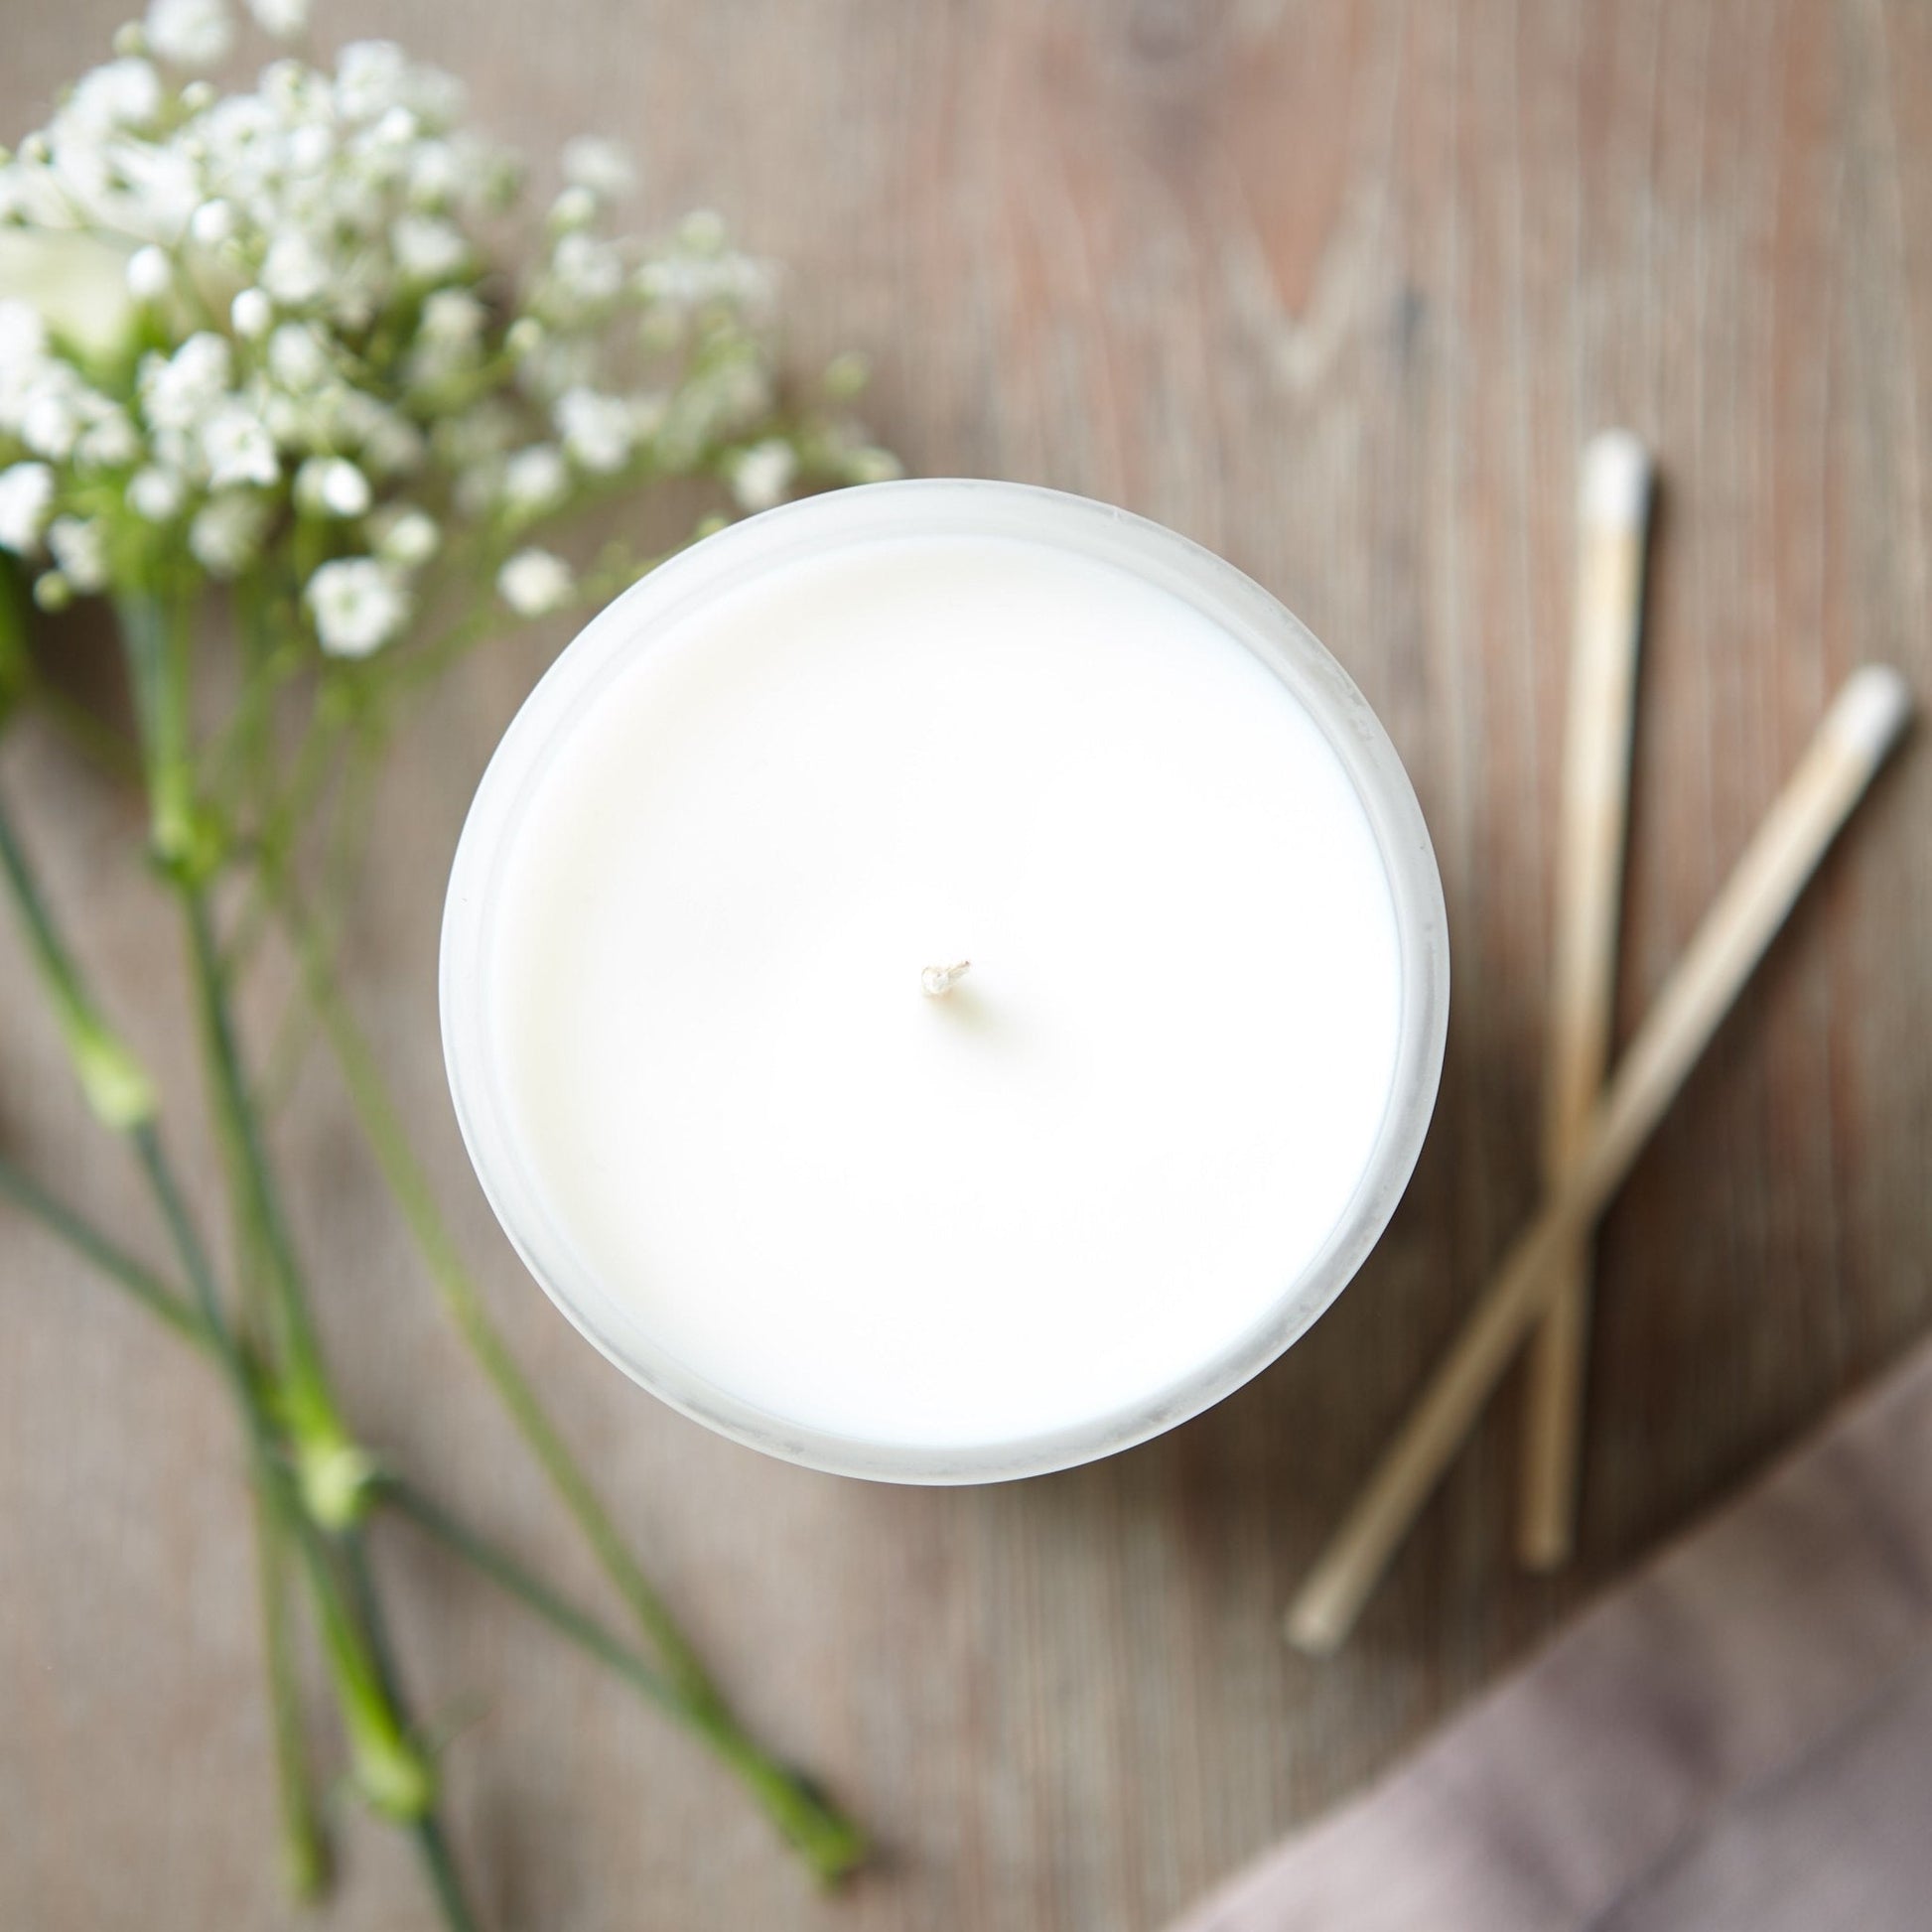 Feels Like Home Folk Candle Summer Collection - Kindred Fires